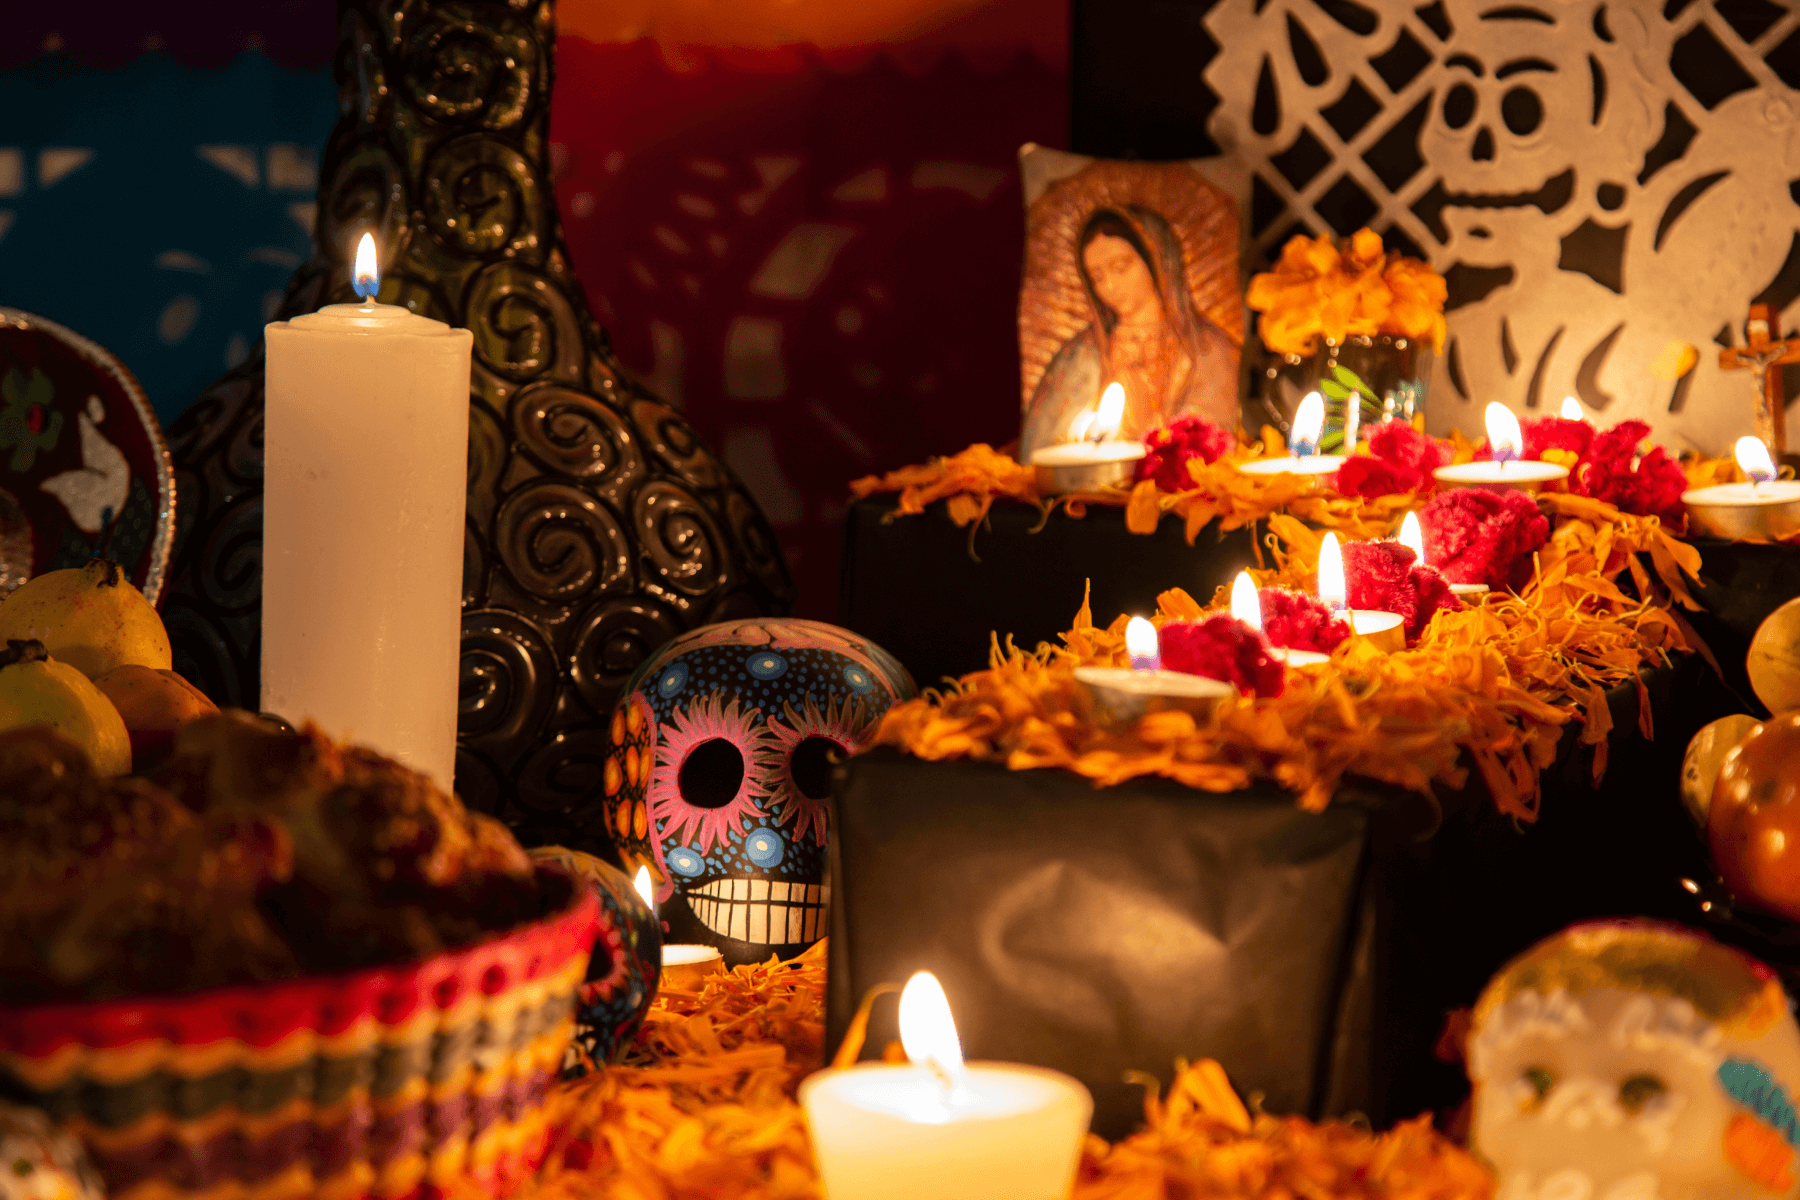 A close-up photograph of an Ofrenda decorated with candles, petals, religious imagery, and skulls.